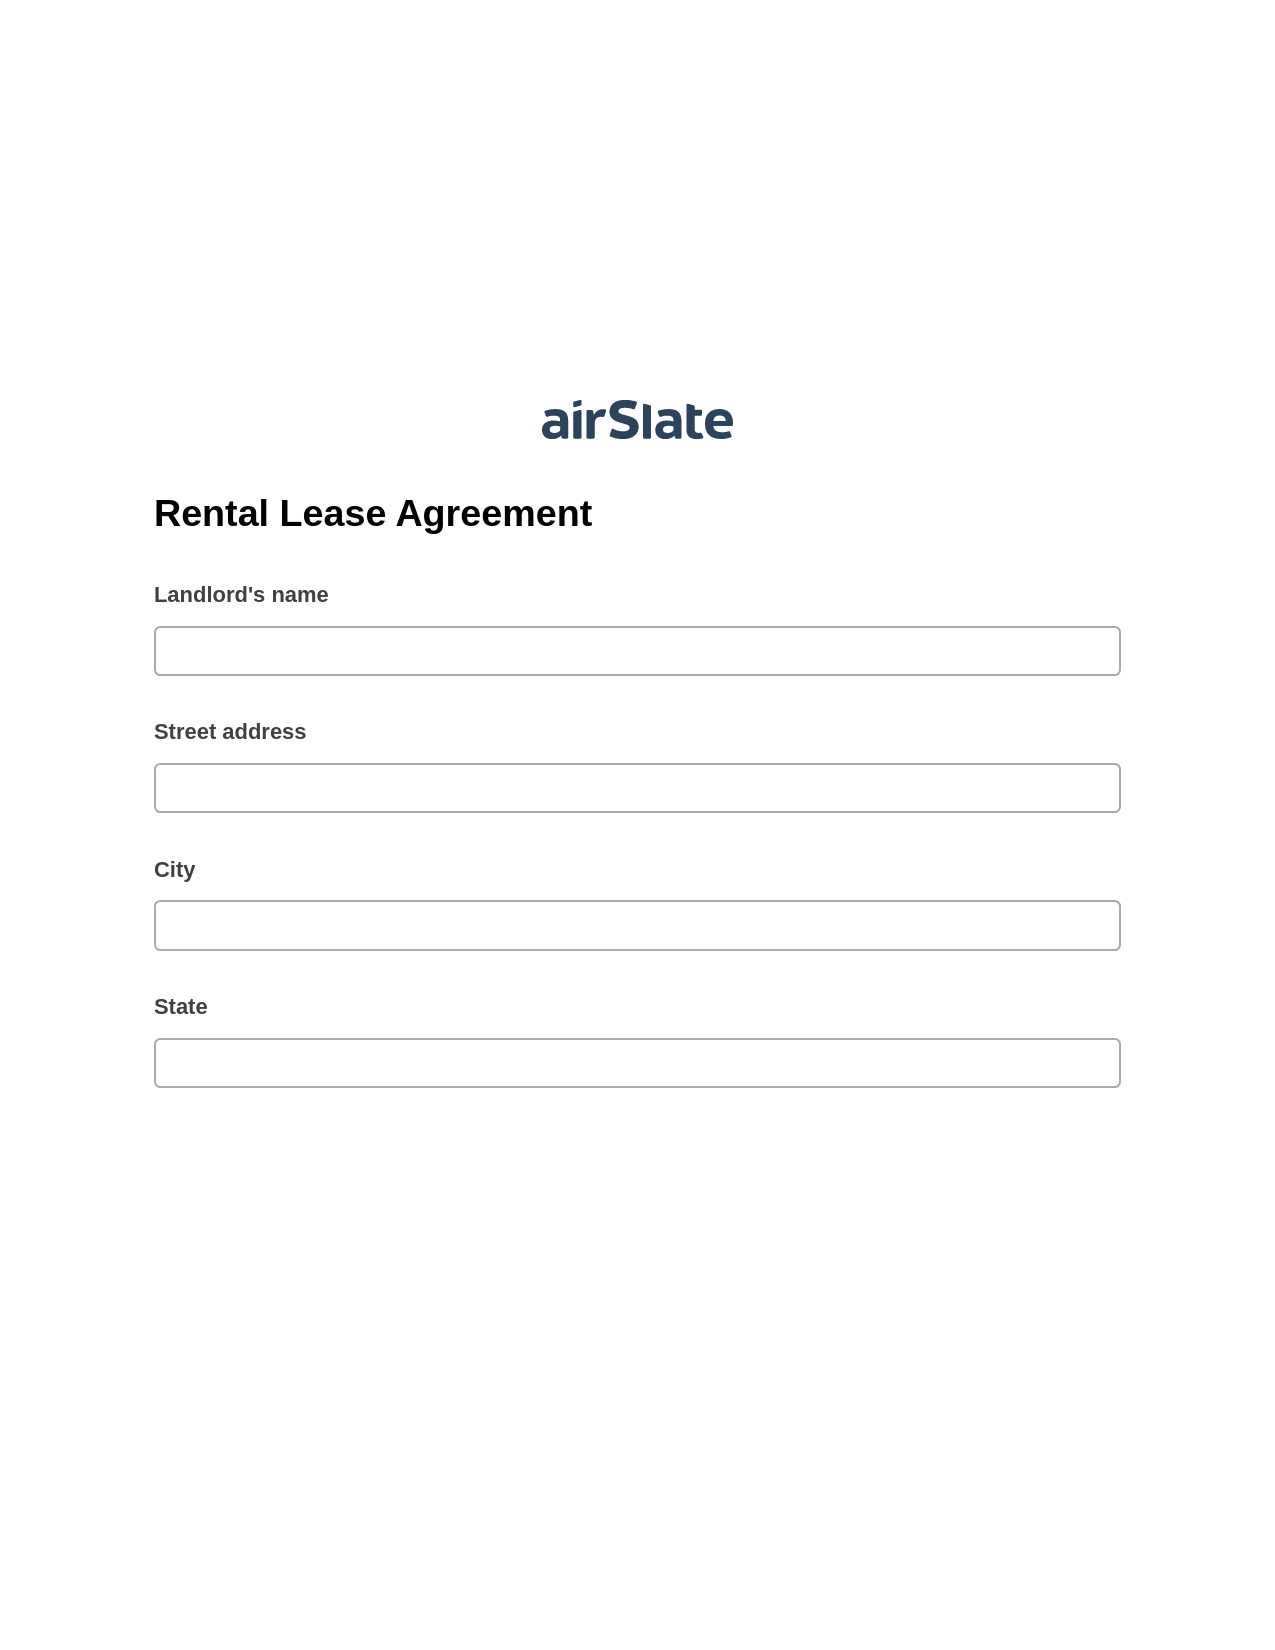 Rental Lease Agreement Pre-fill from Google Sheet Dropdown Options Bot, Jira Bot, Export to Salesforce Bot